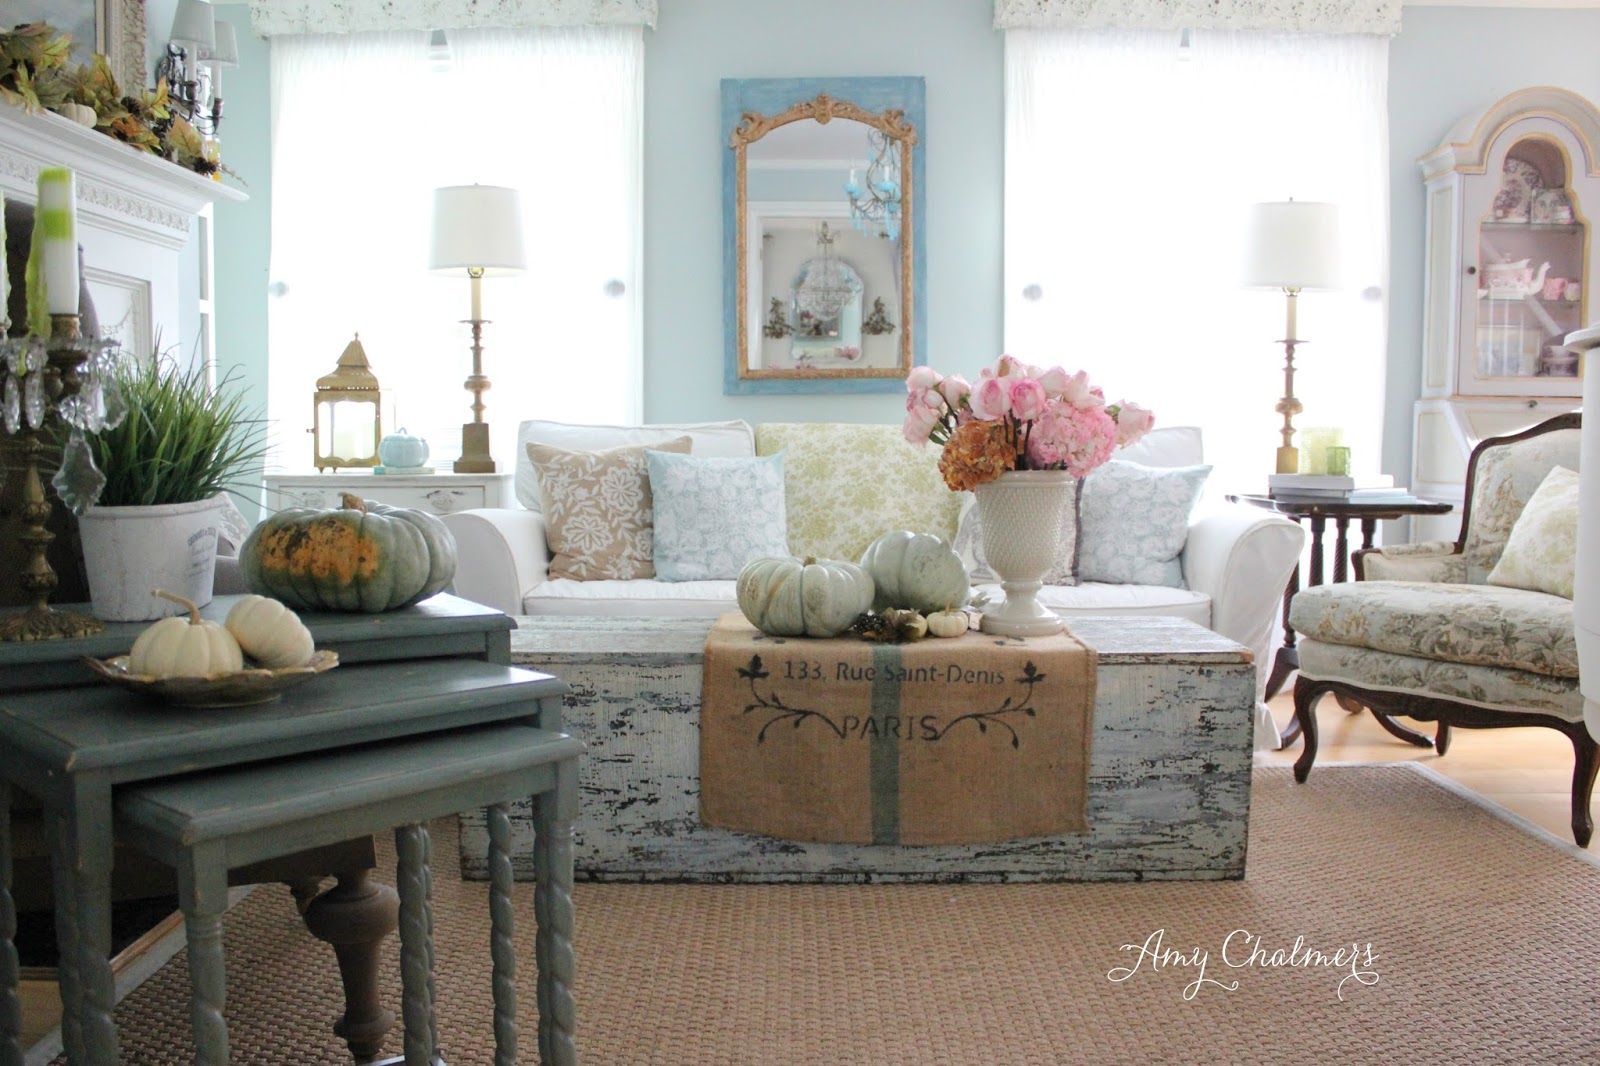 Maison Decor: A Fall French Country Home Tour with Soft ...